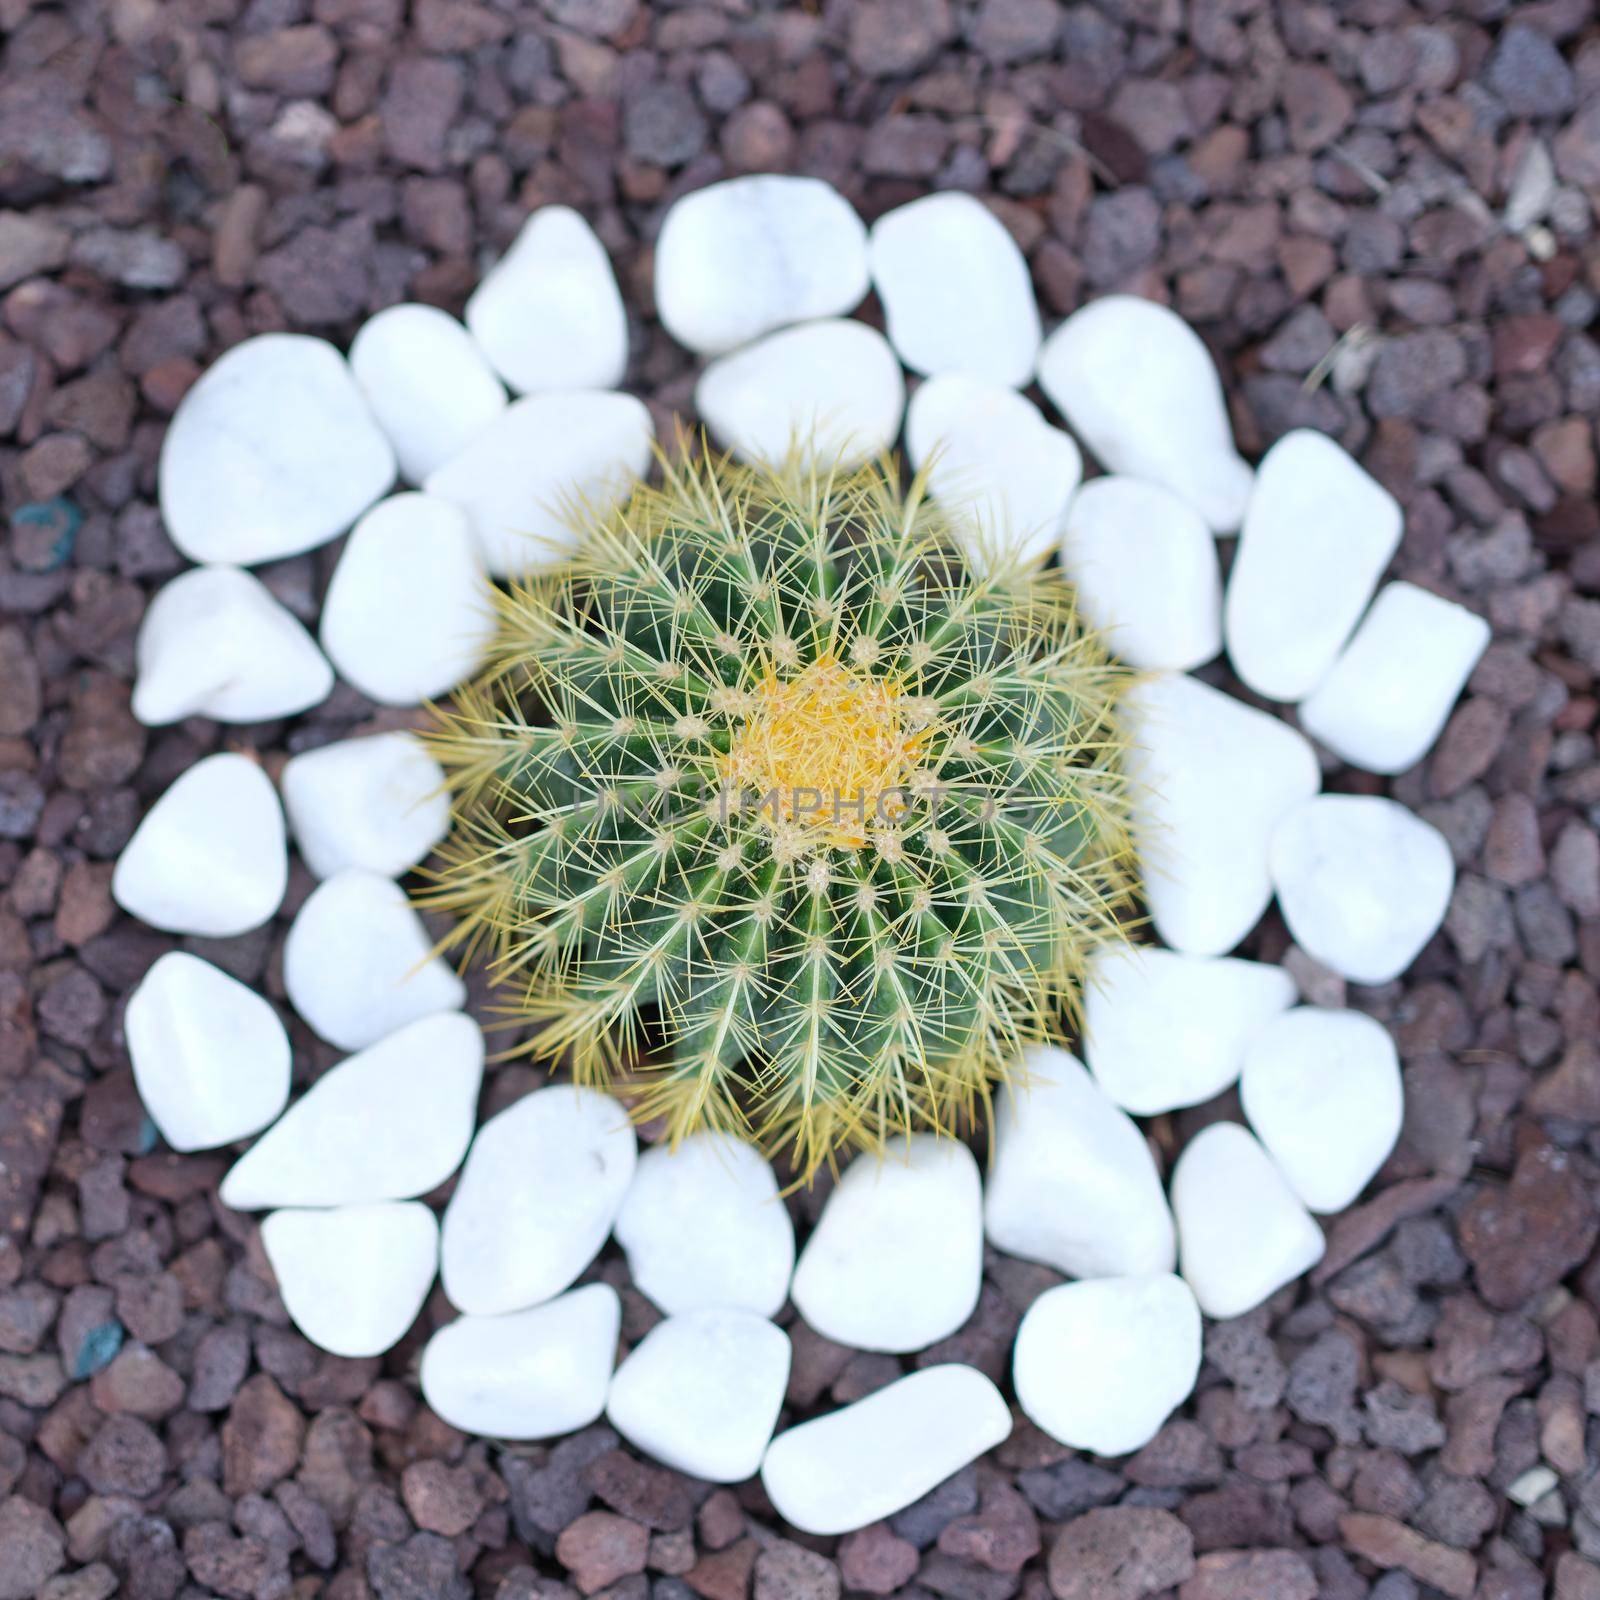 Beautiful little cactus grows in flower bed. Soil is strewn with white stones and landscaping closeup